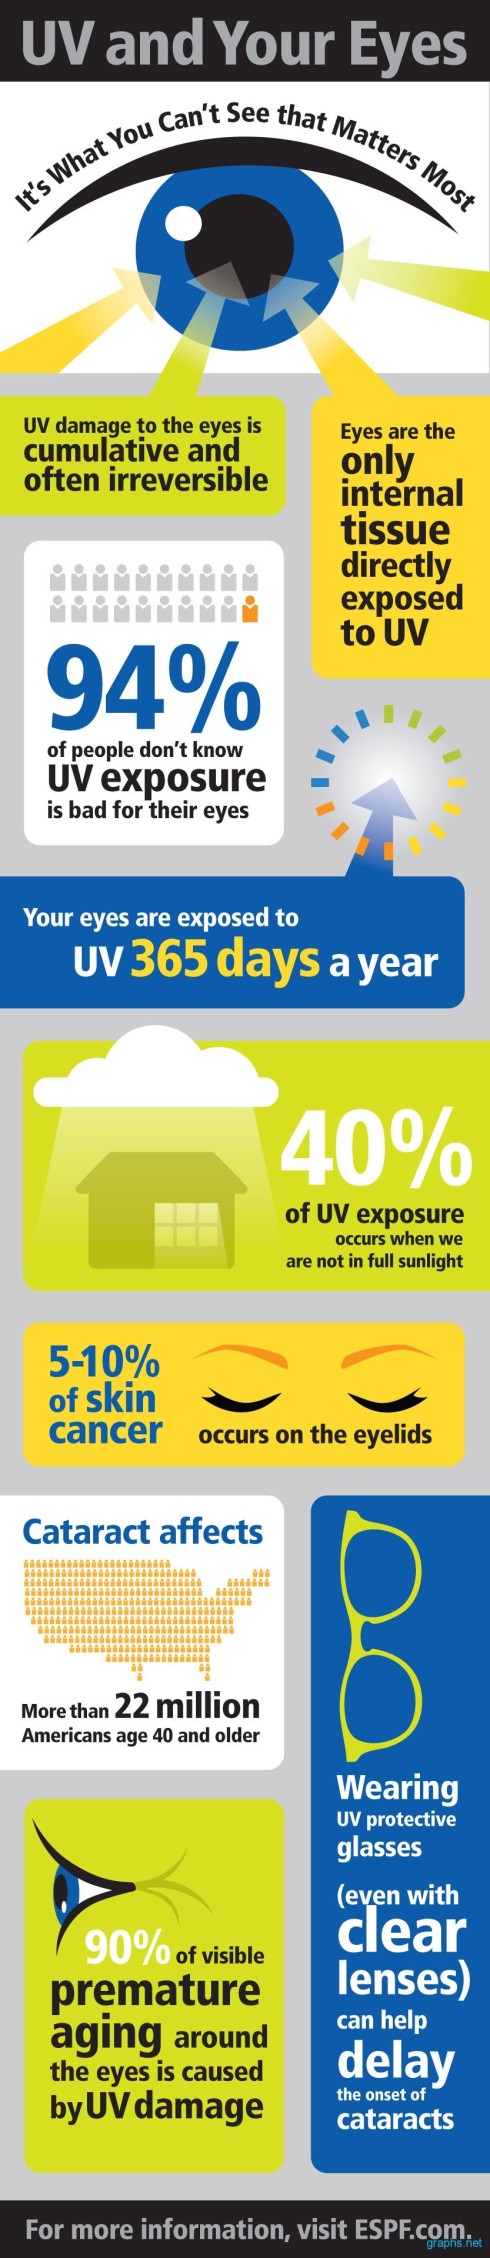 Uv and your eyes